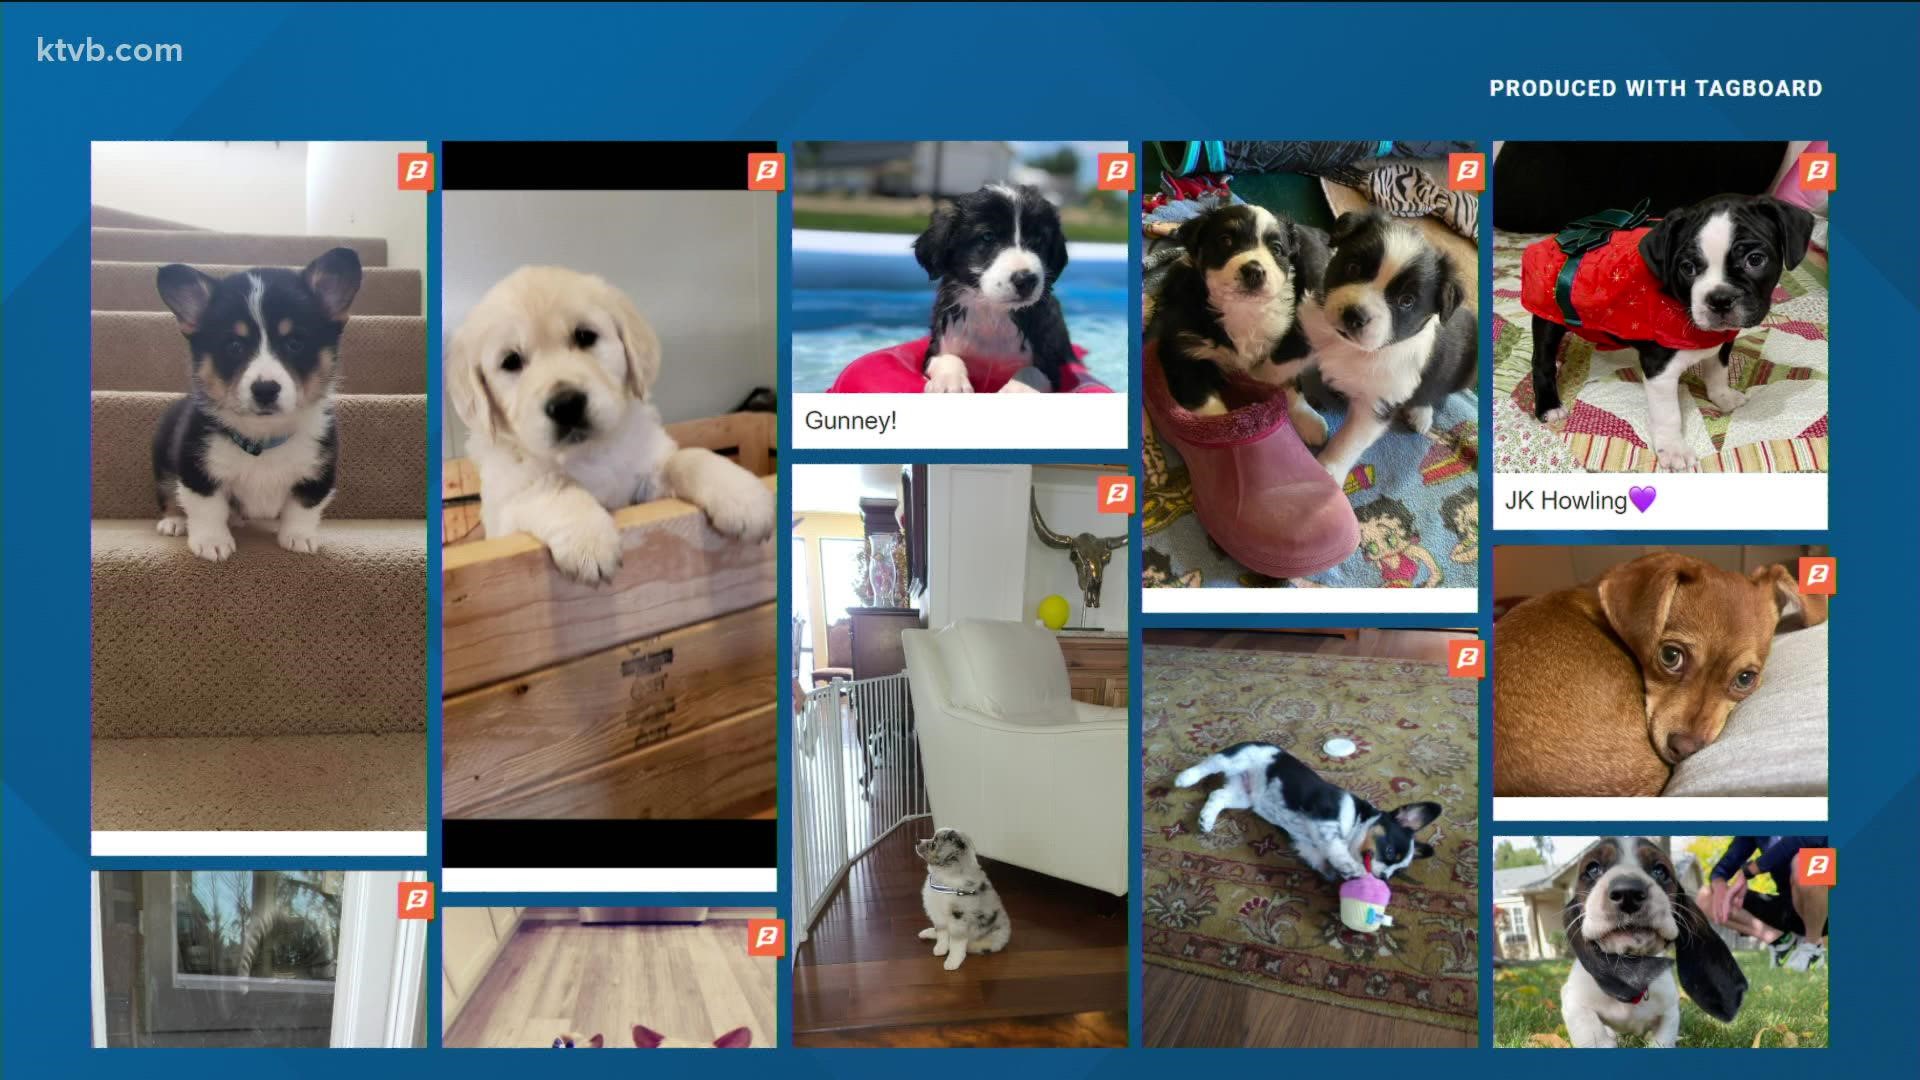 Viewers were asked to send in pictures and videos of their cute puppies. Here are a few of them we featured on our show.